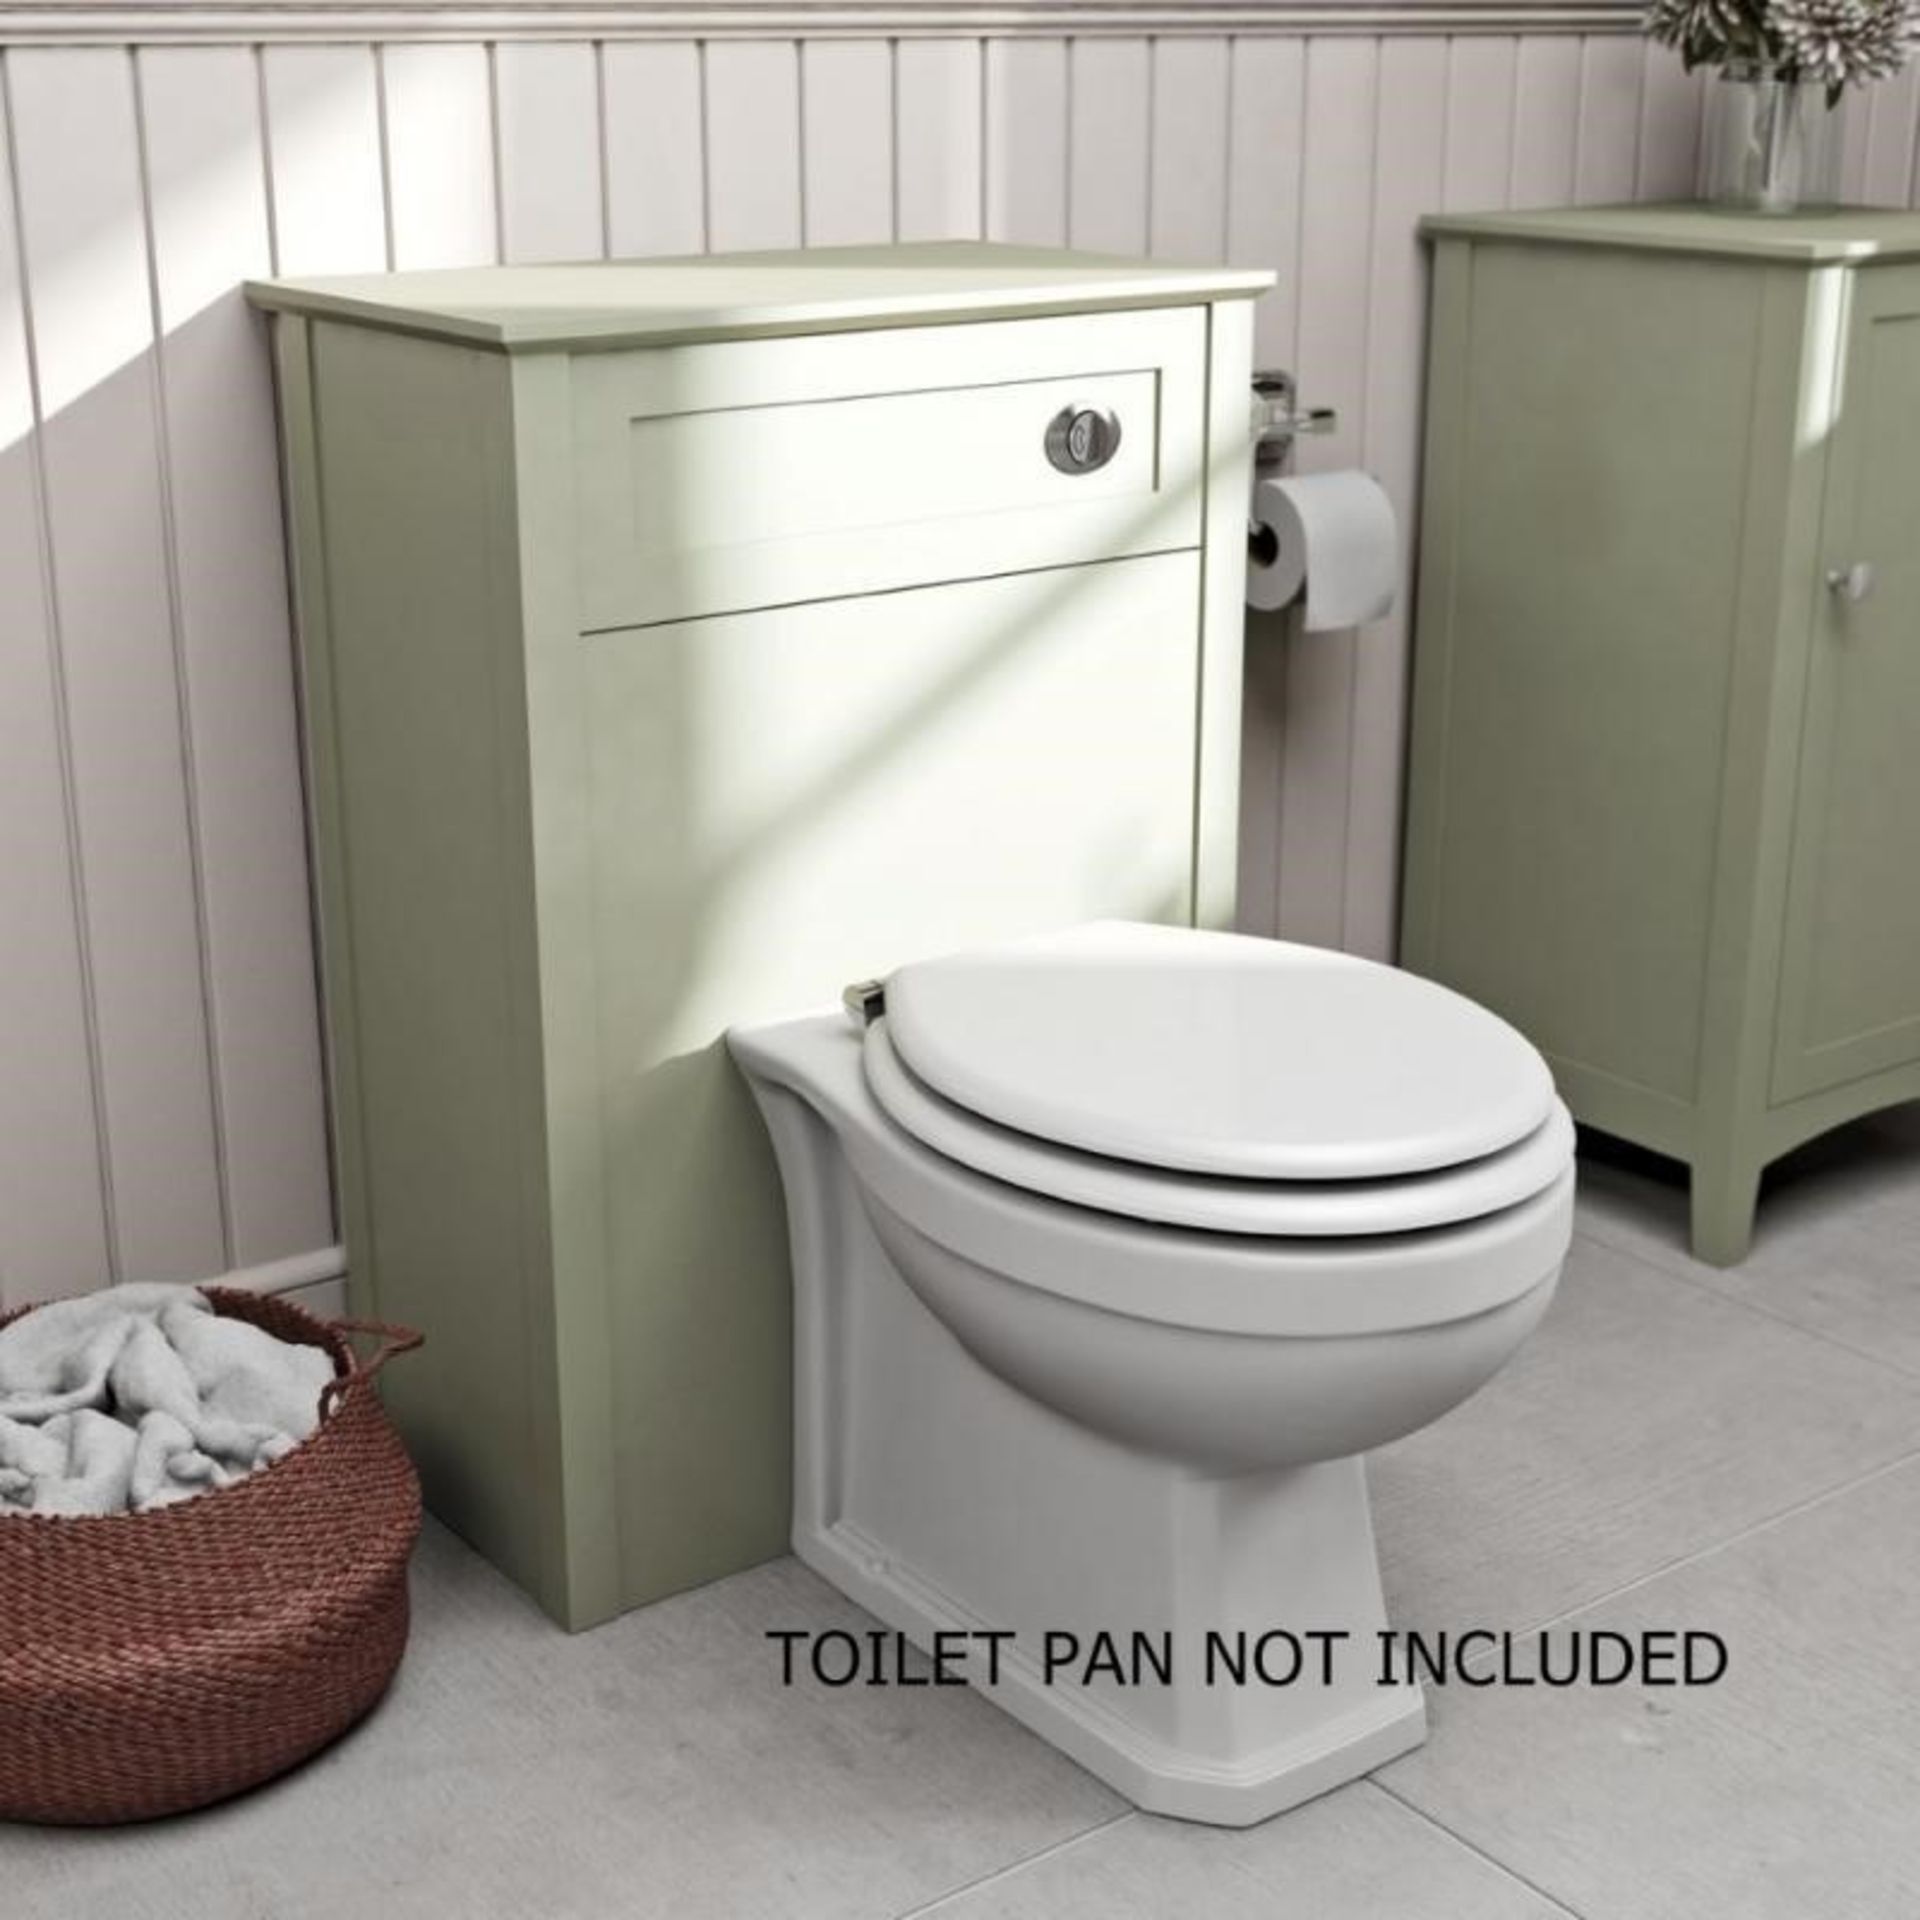 1 x Bath Co Camberley Sage Back to Wall Toilet Pan Unit - Toilet Pan Not Included - H818 x W570 x D3 - Image 3 of 3